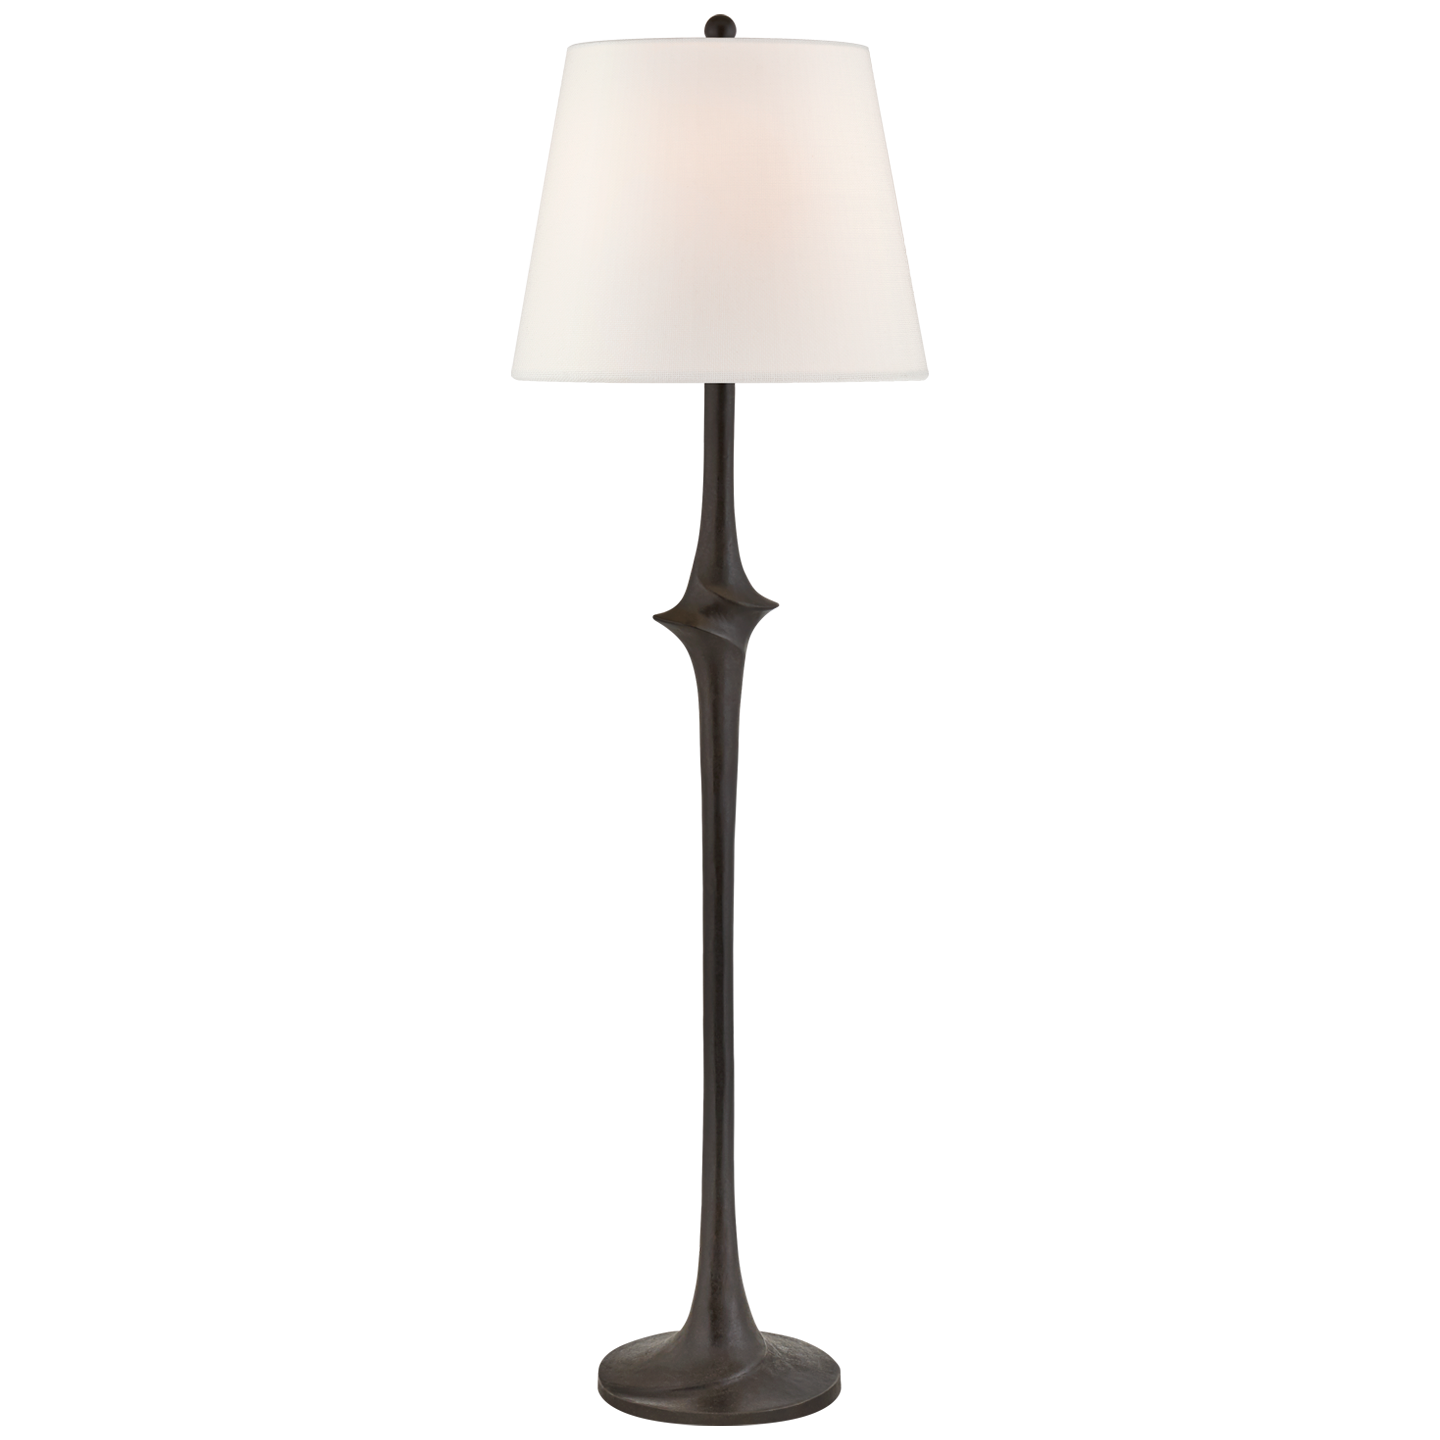 CHA9161AB by Visual Comfort - Apothecary Floor Lamp in Antique